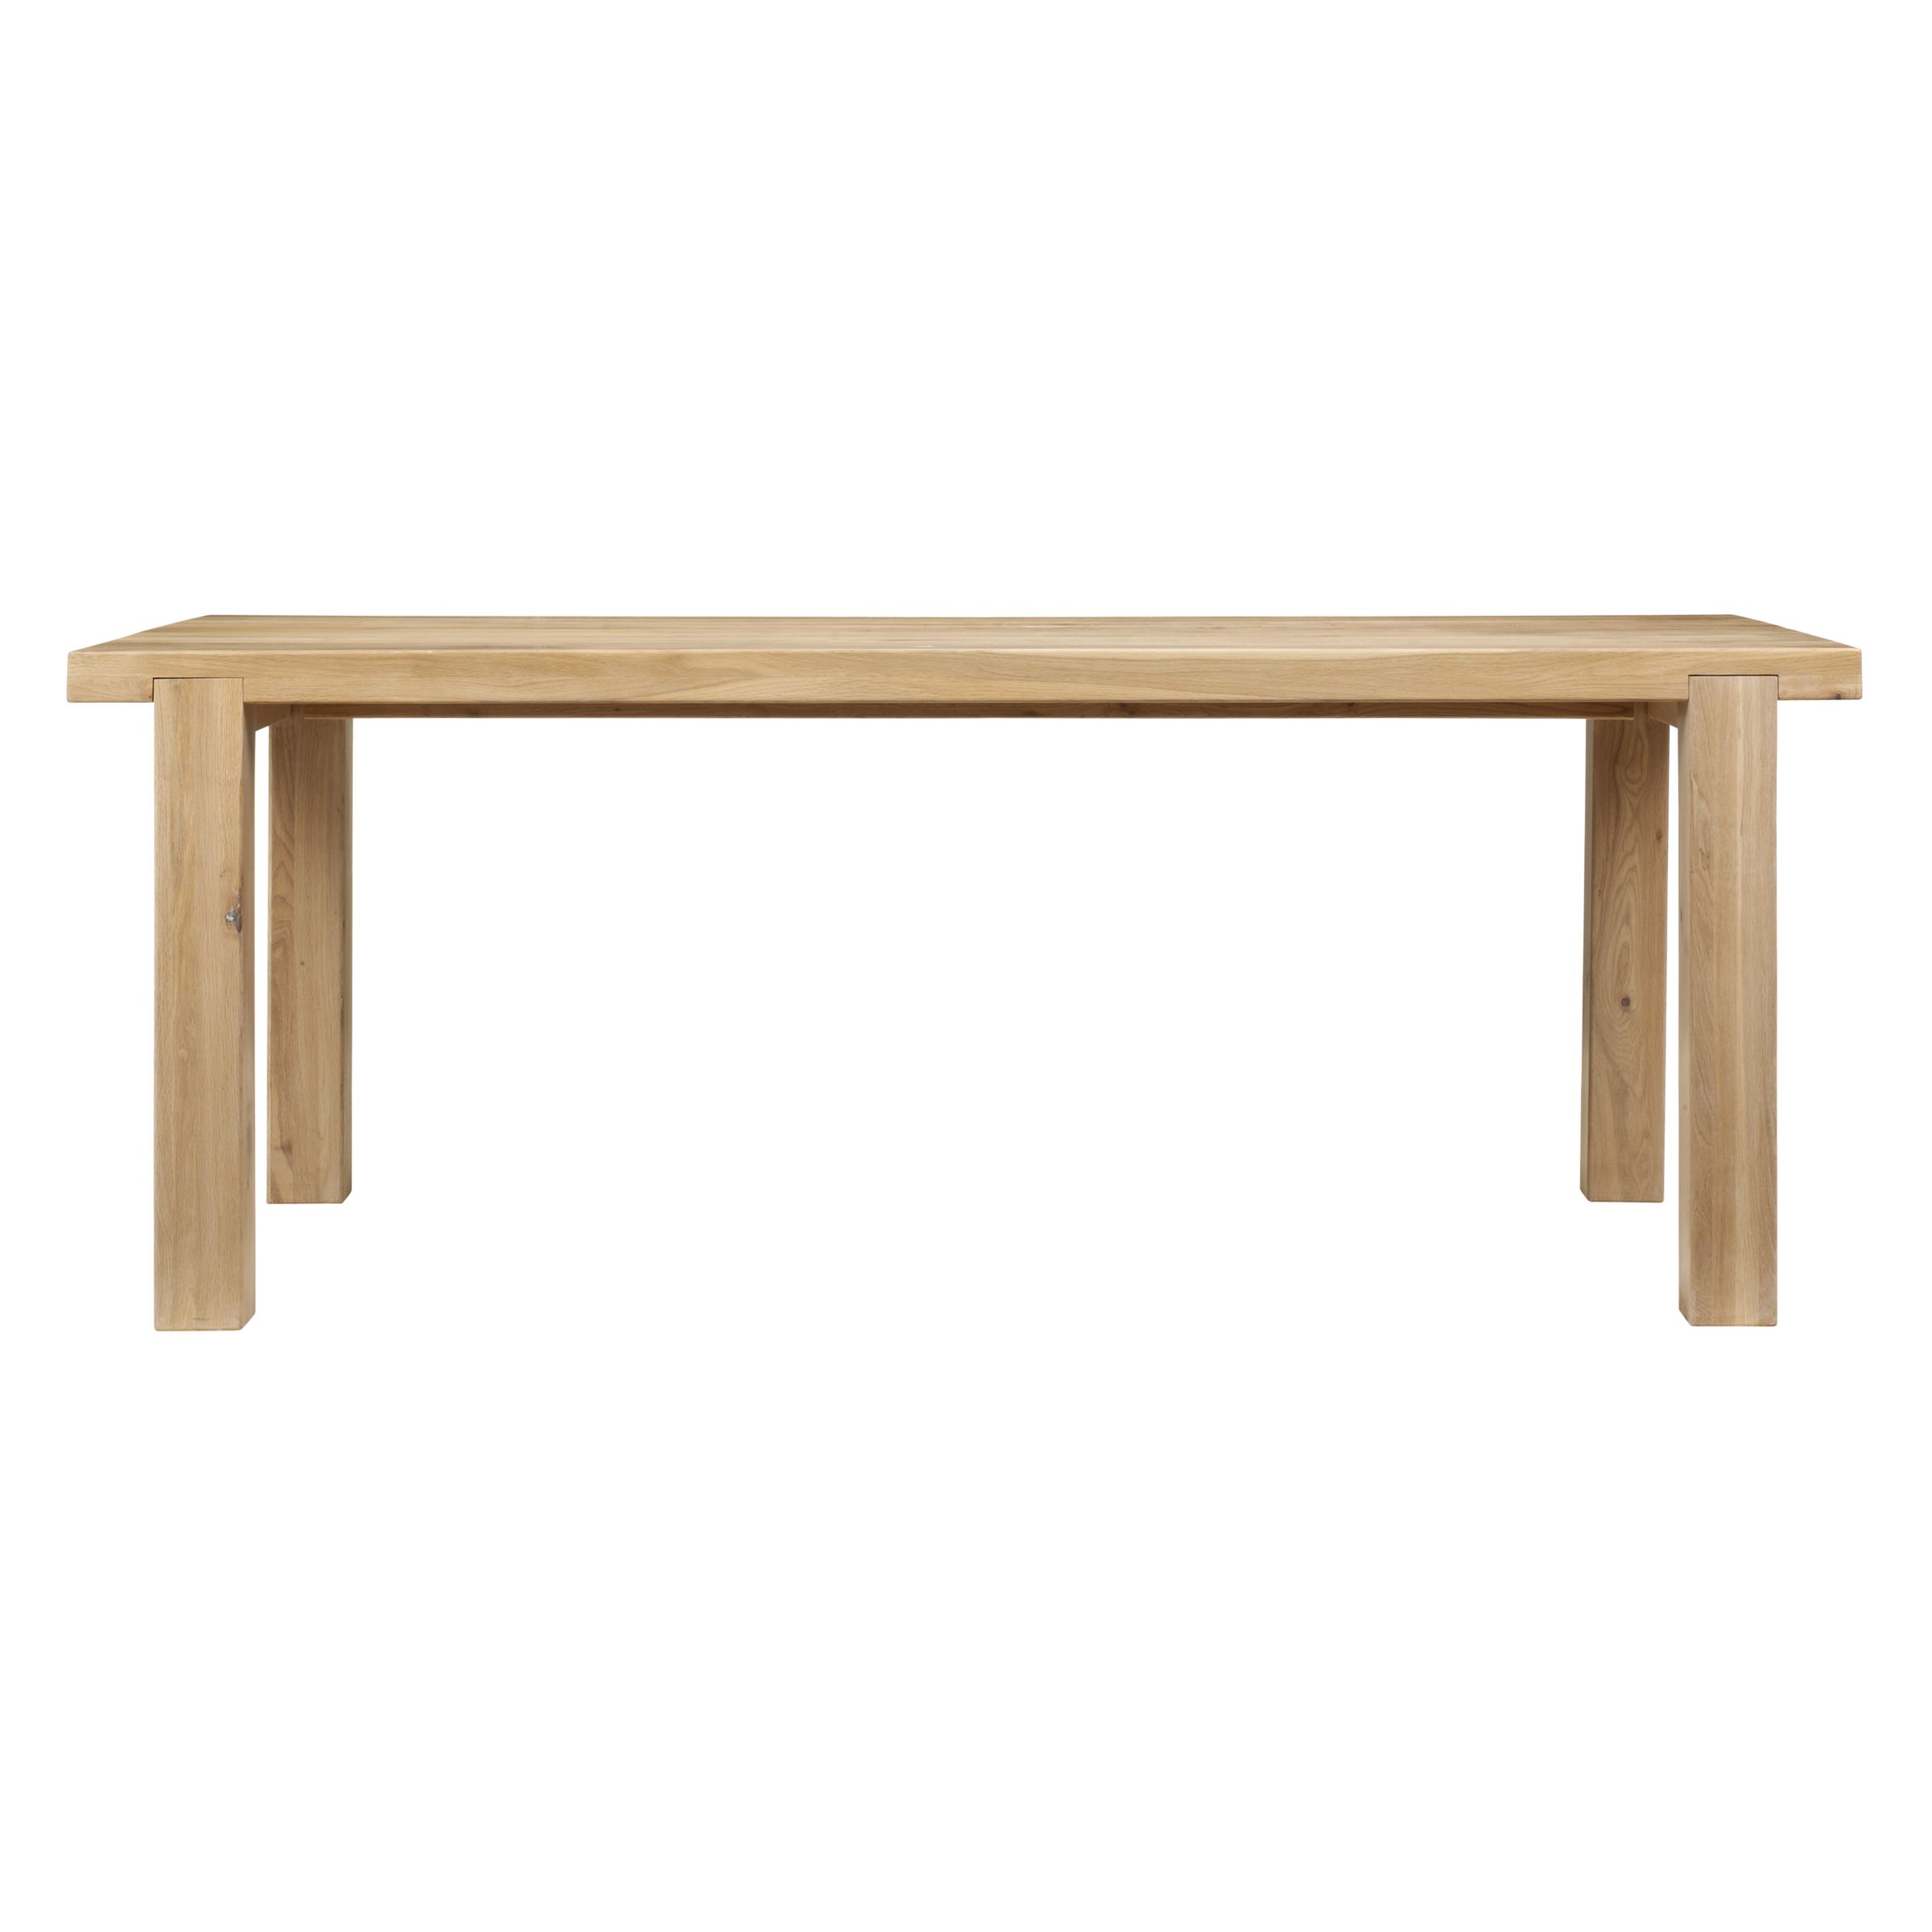 Honesty 8 Seat Dining Table